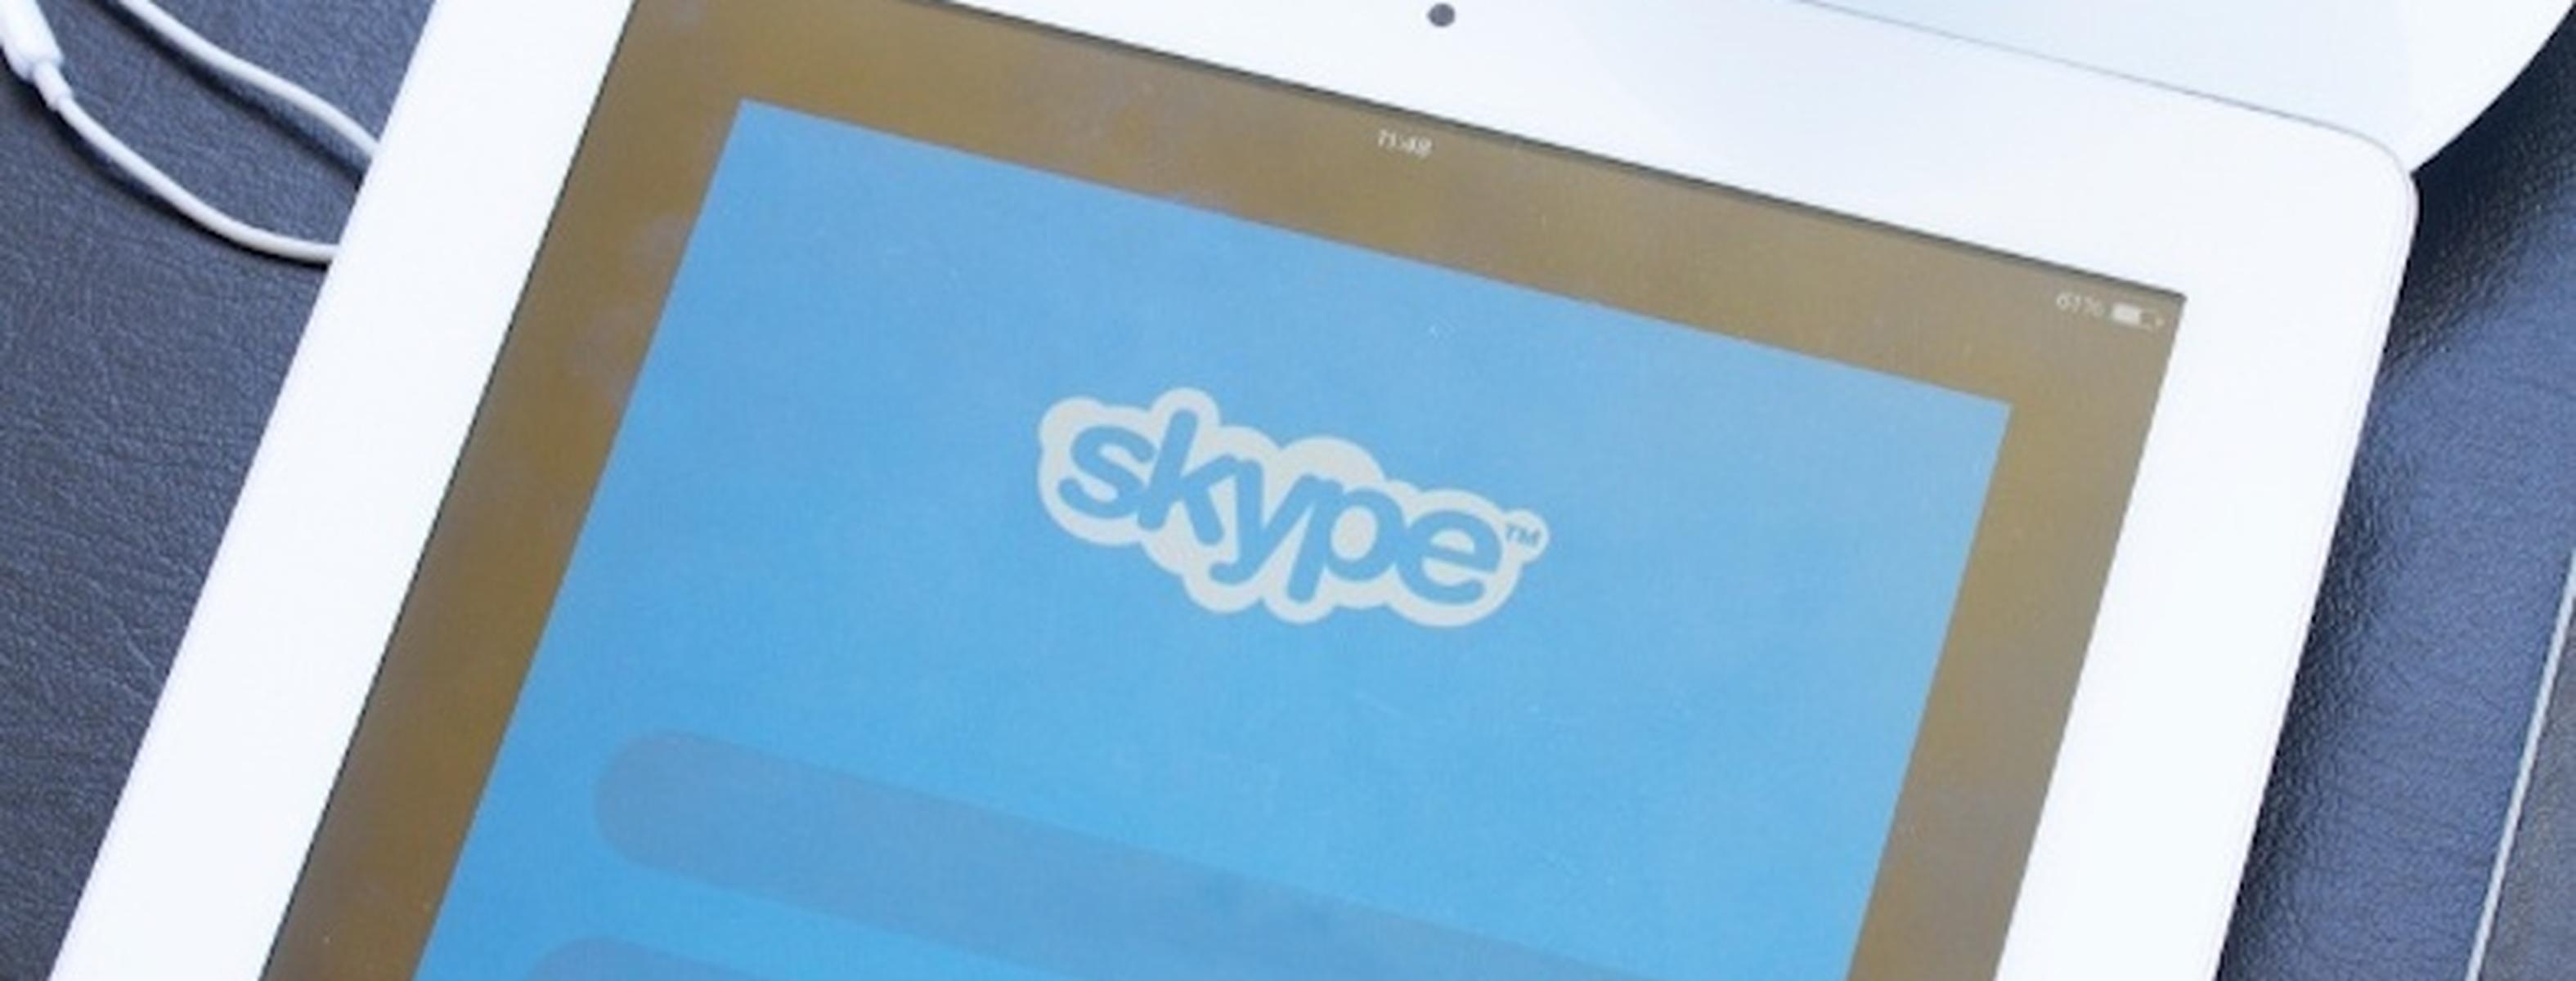 igrabber use with skype